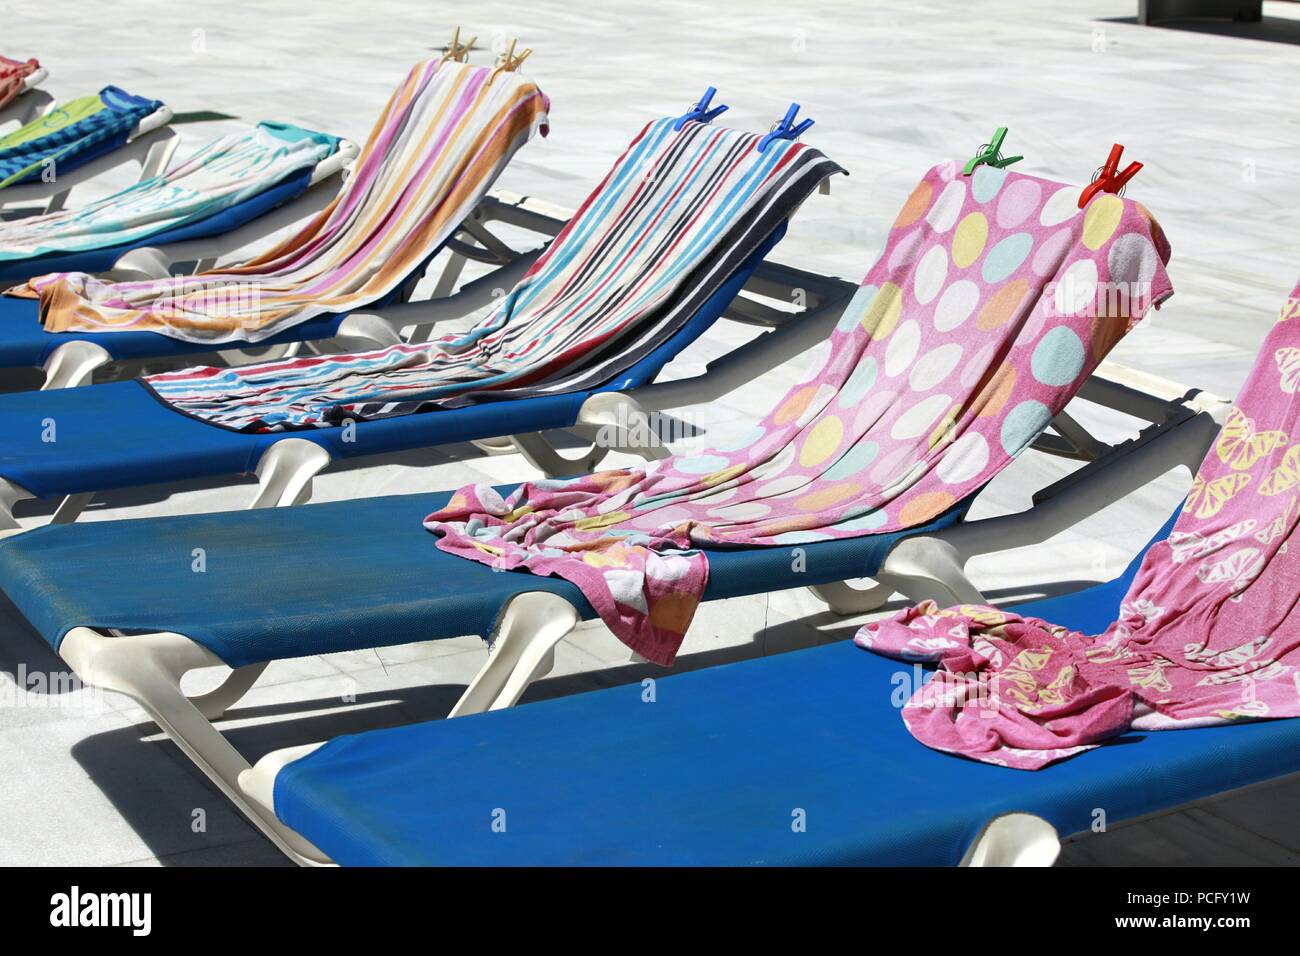 Roquetas de Mar, Almeria, Spain. 2nd Aug, 2018. The heatwave that is hitting Spain is expected to exceed 43°C in some parts of the country. Row of empty sun loungers reserved with towels. Clothes pegs hold them in place. Photo Credit: Paul Lawrenson /Alamy Live News Stock Photo